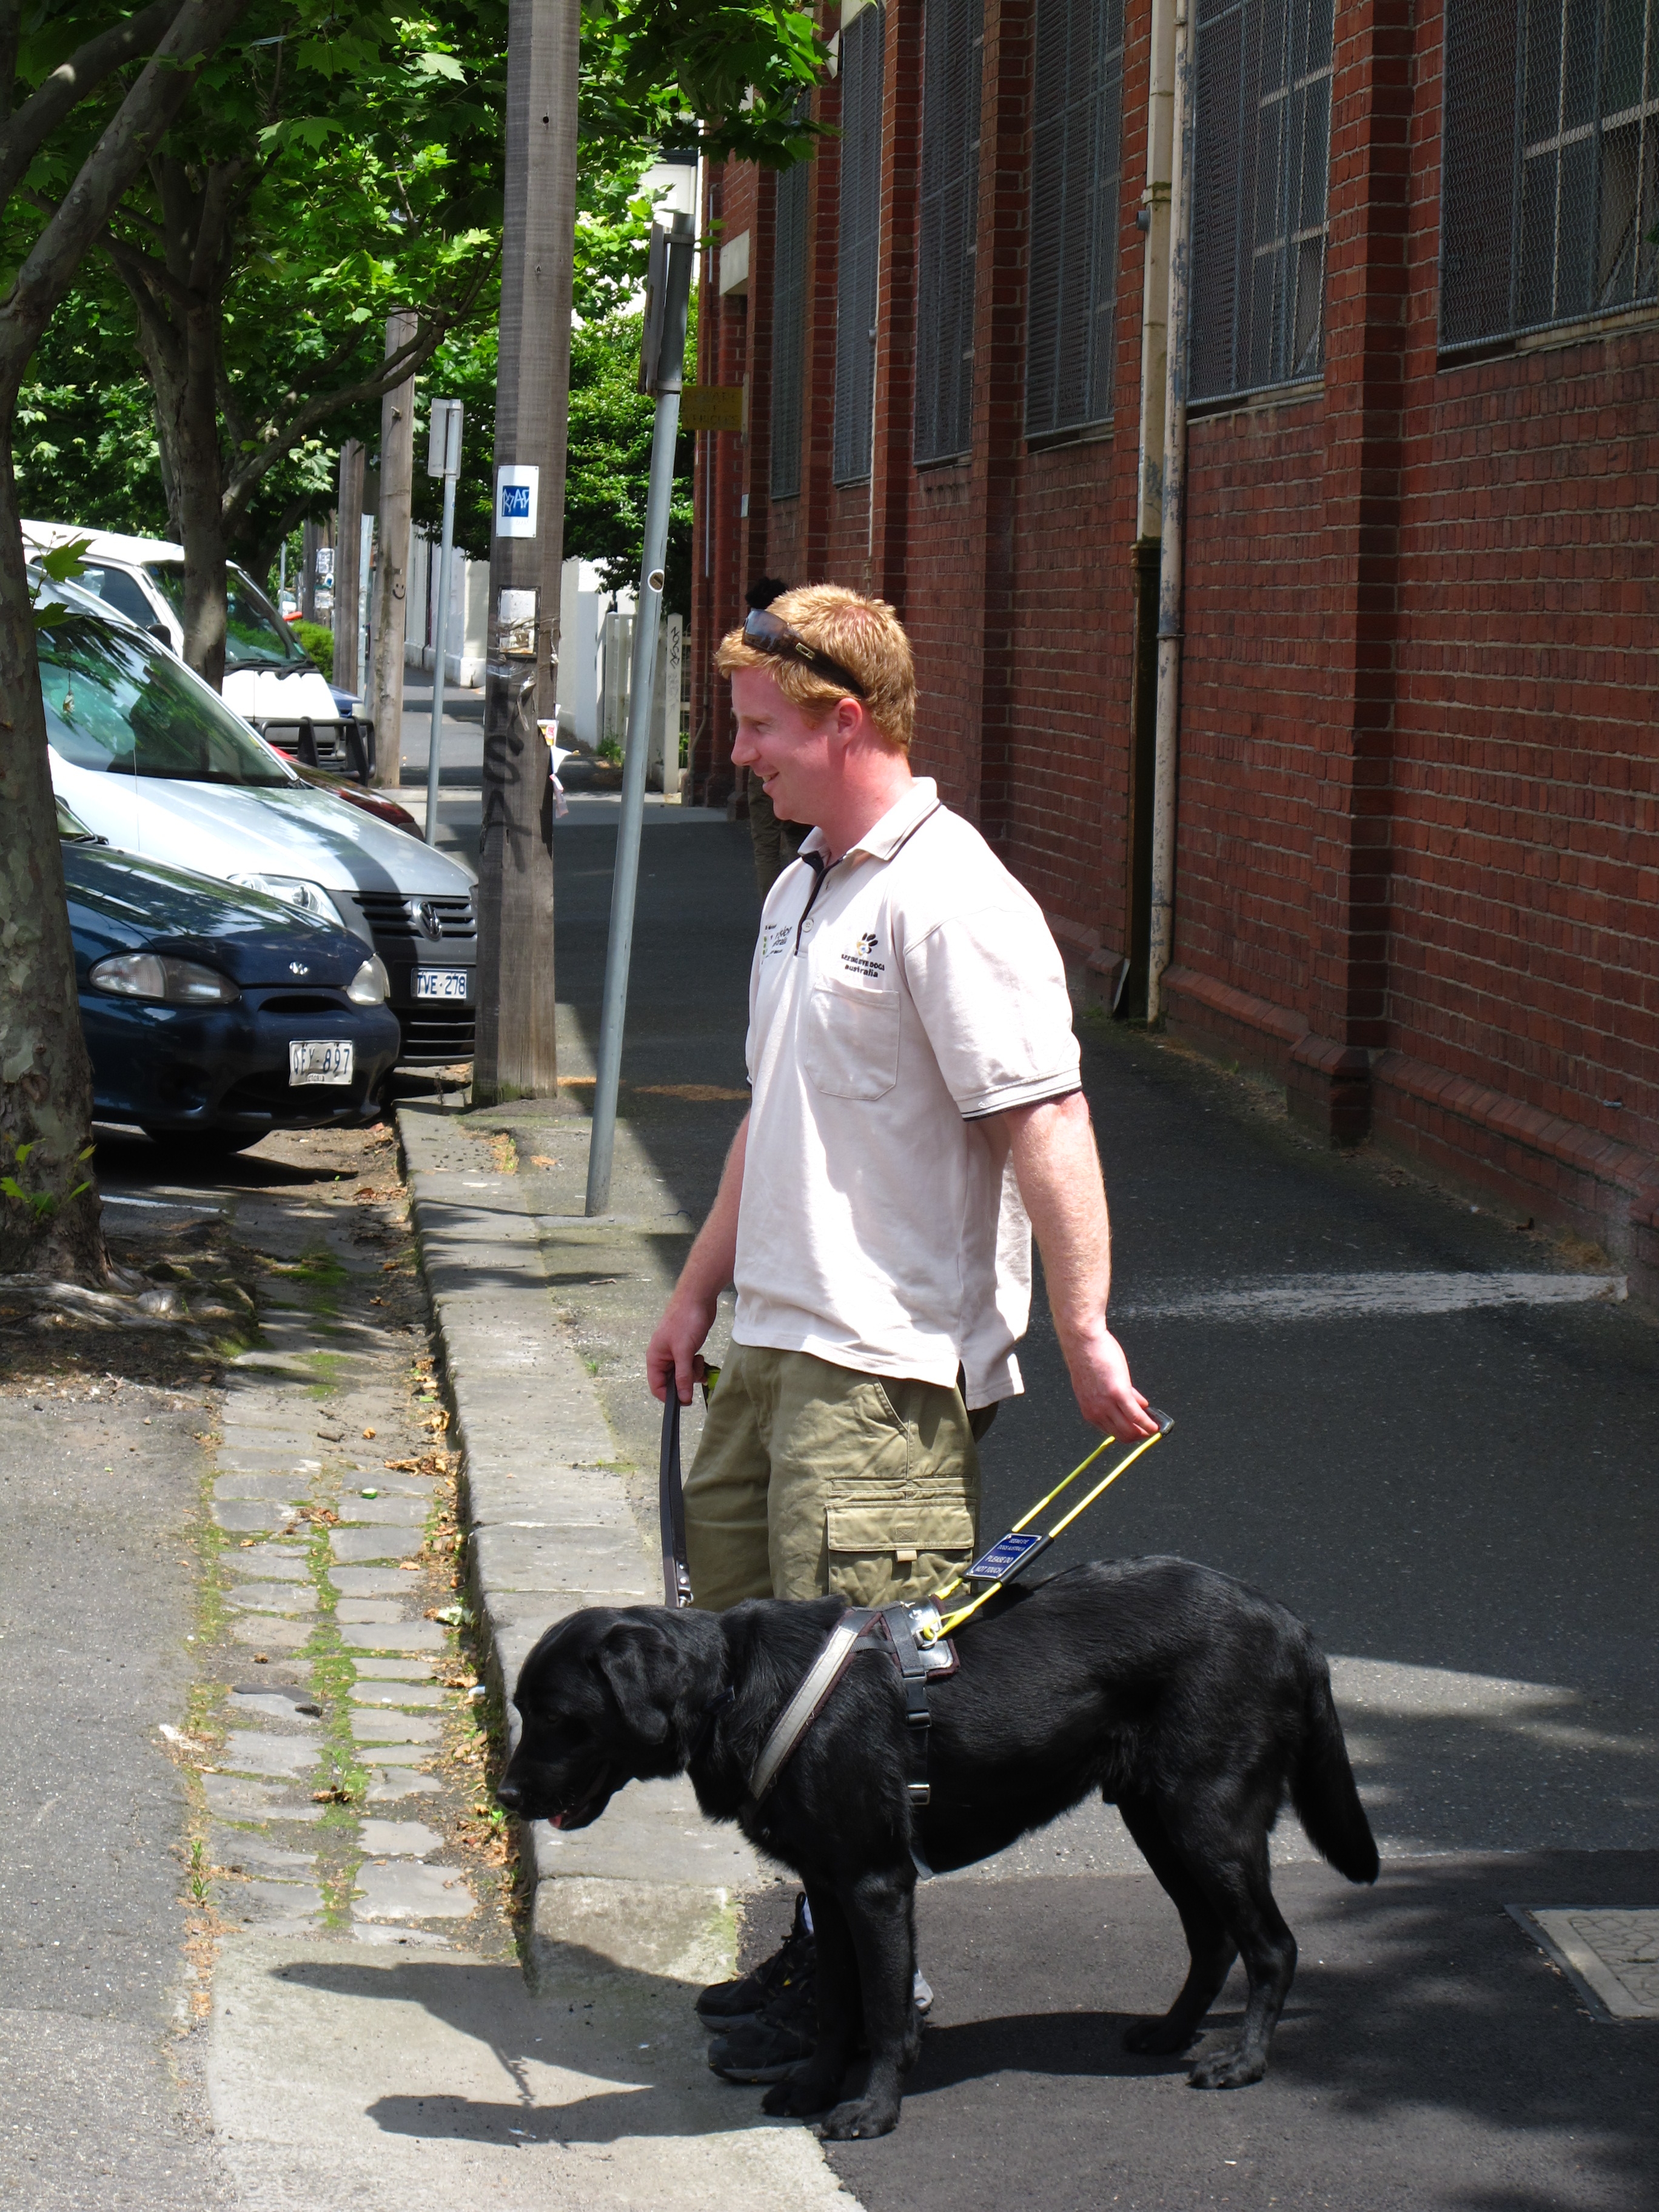 Man with seeing eye dog starting to cross the road